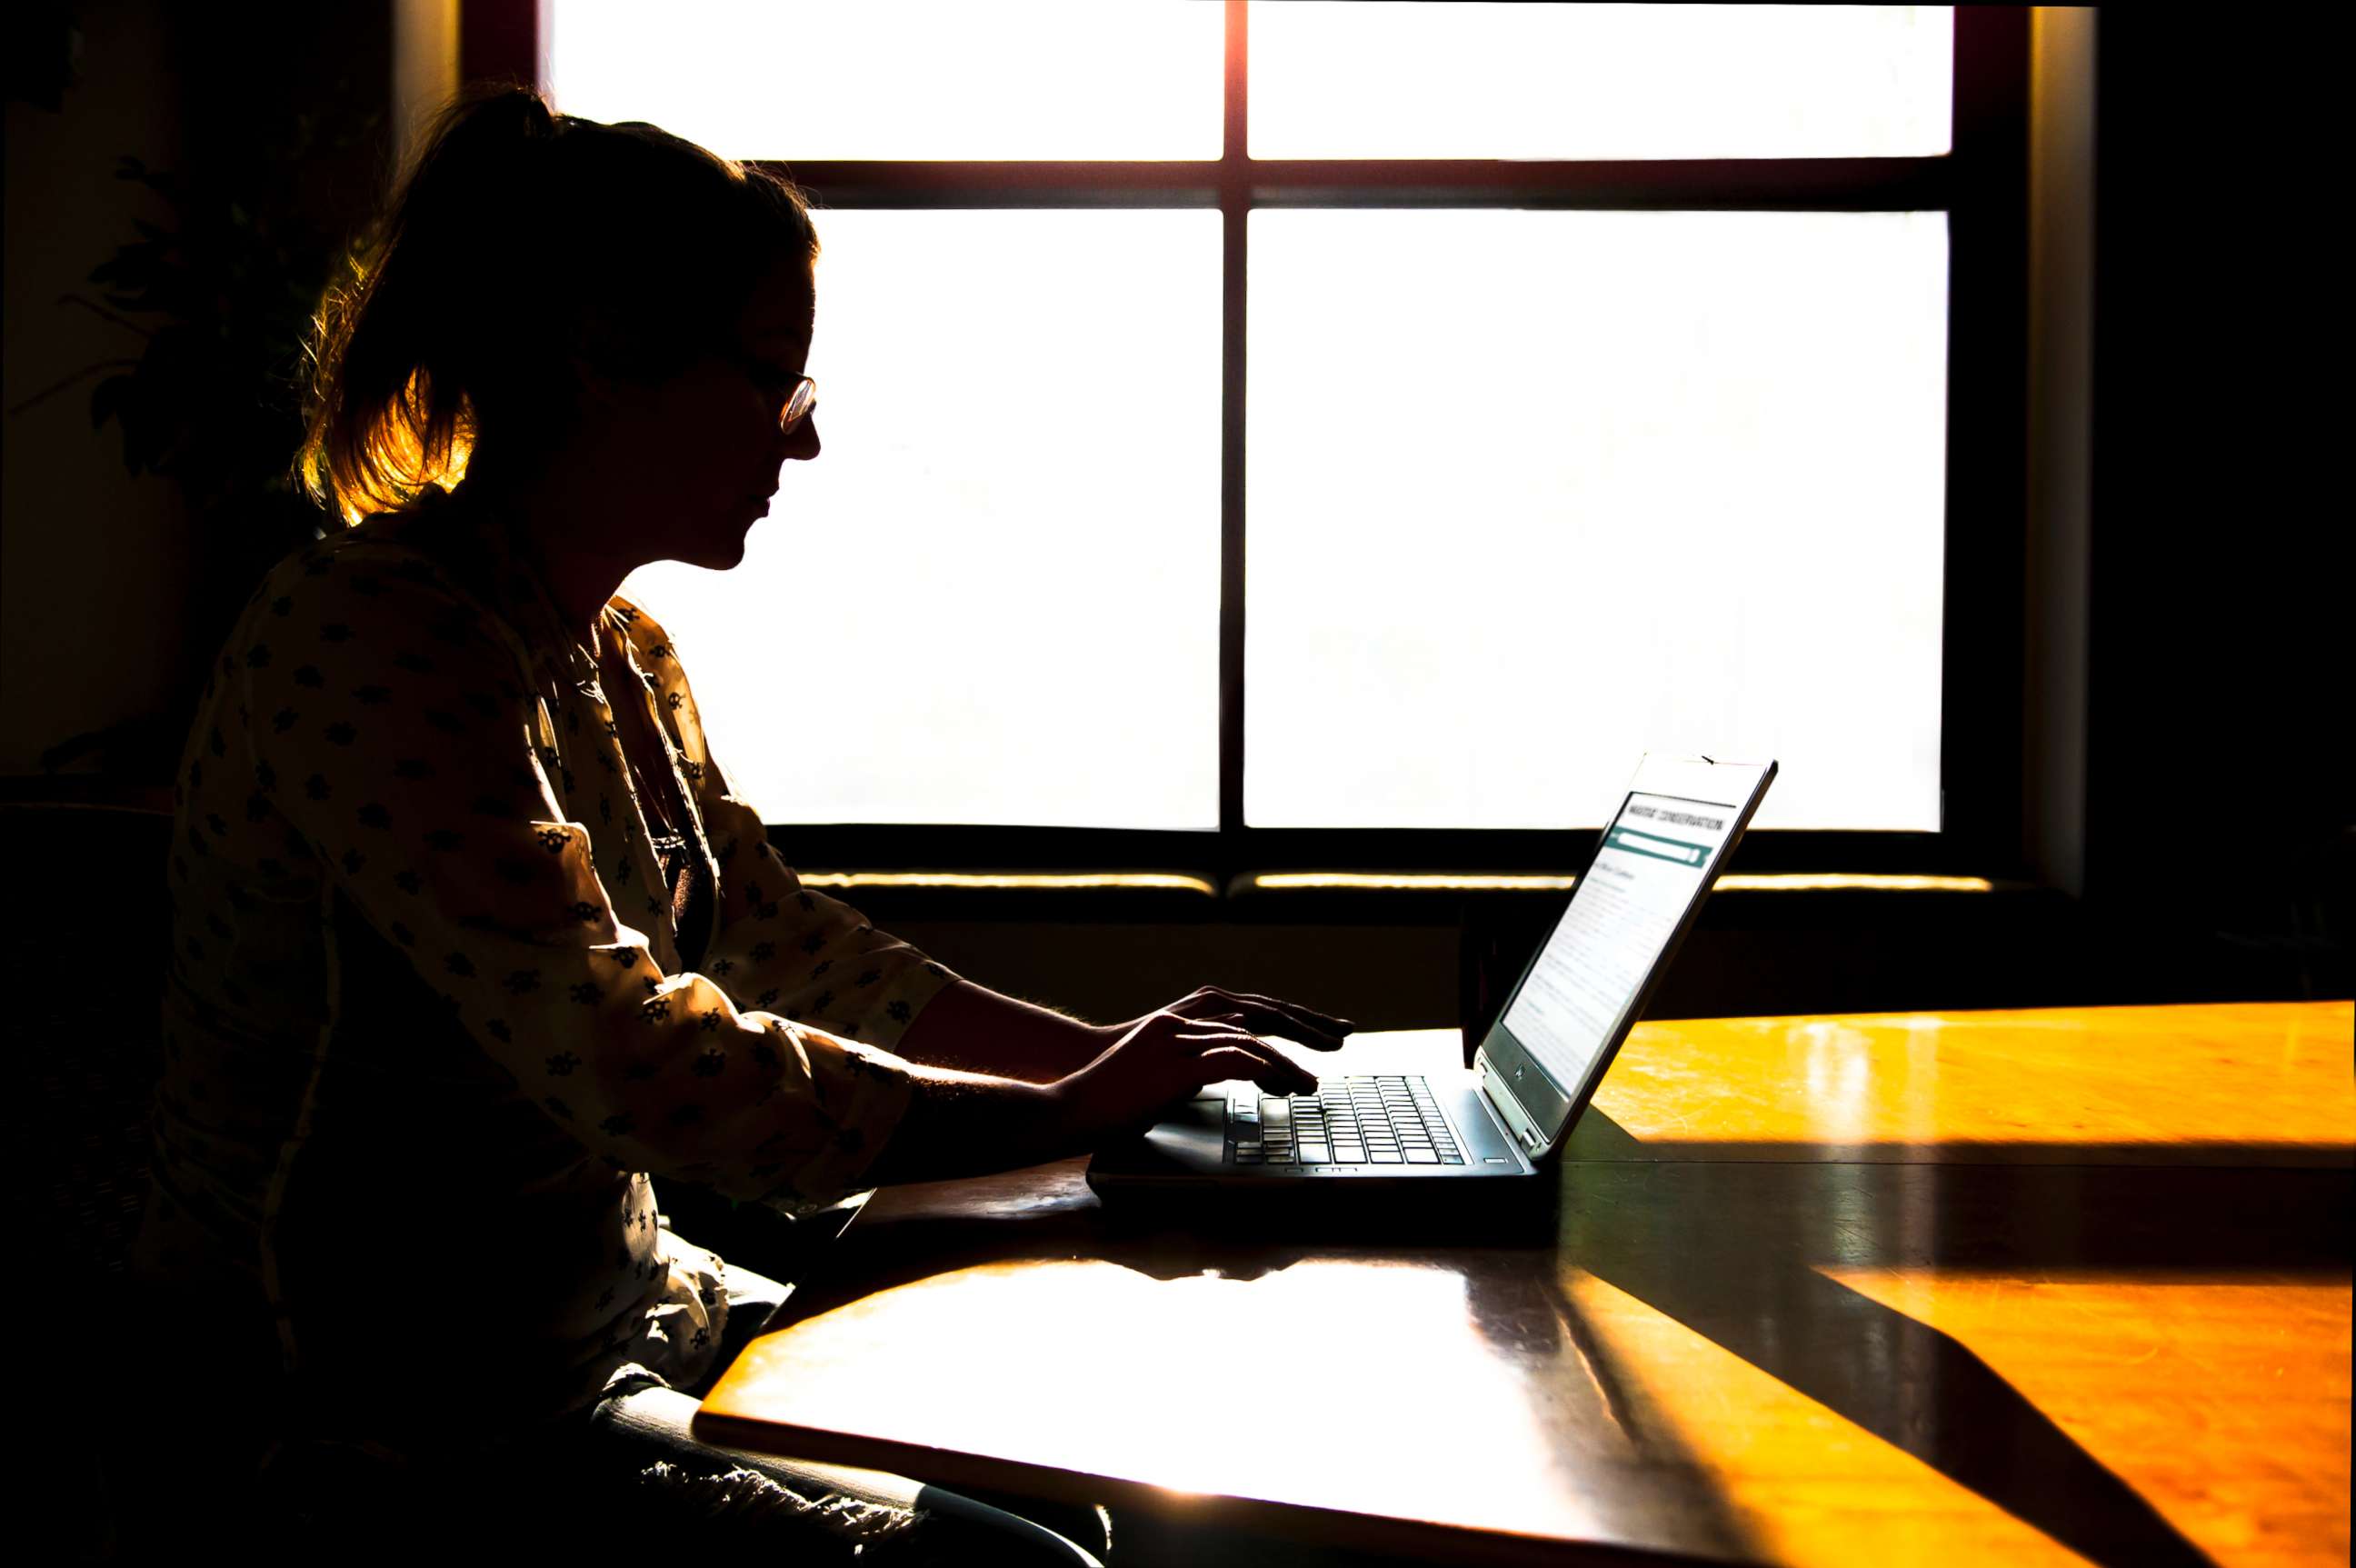 PHOTO: A woman uses a computer in this stock photo.